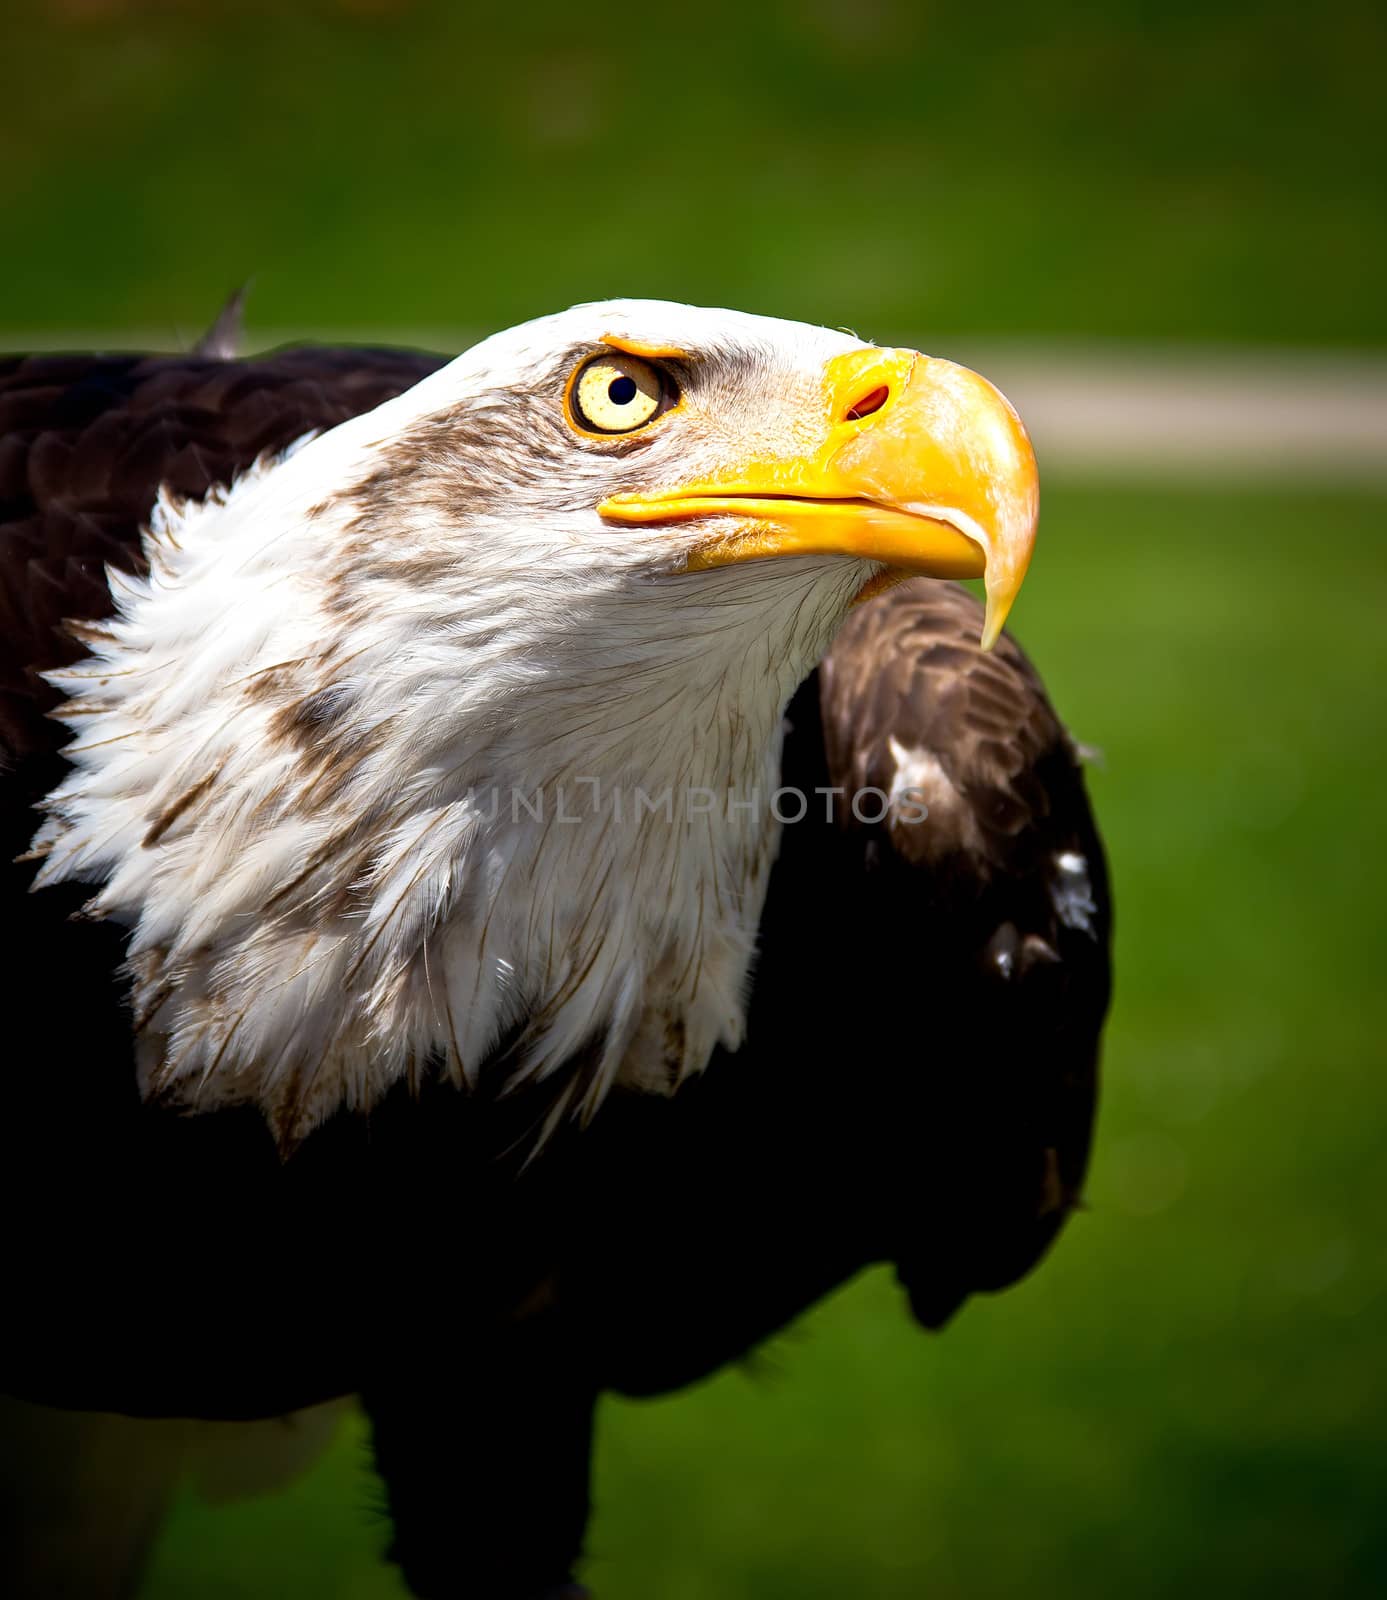 bald eagle by marco_govel